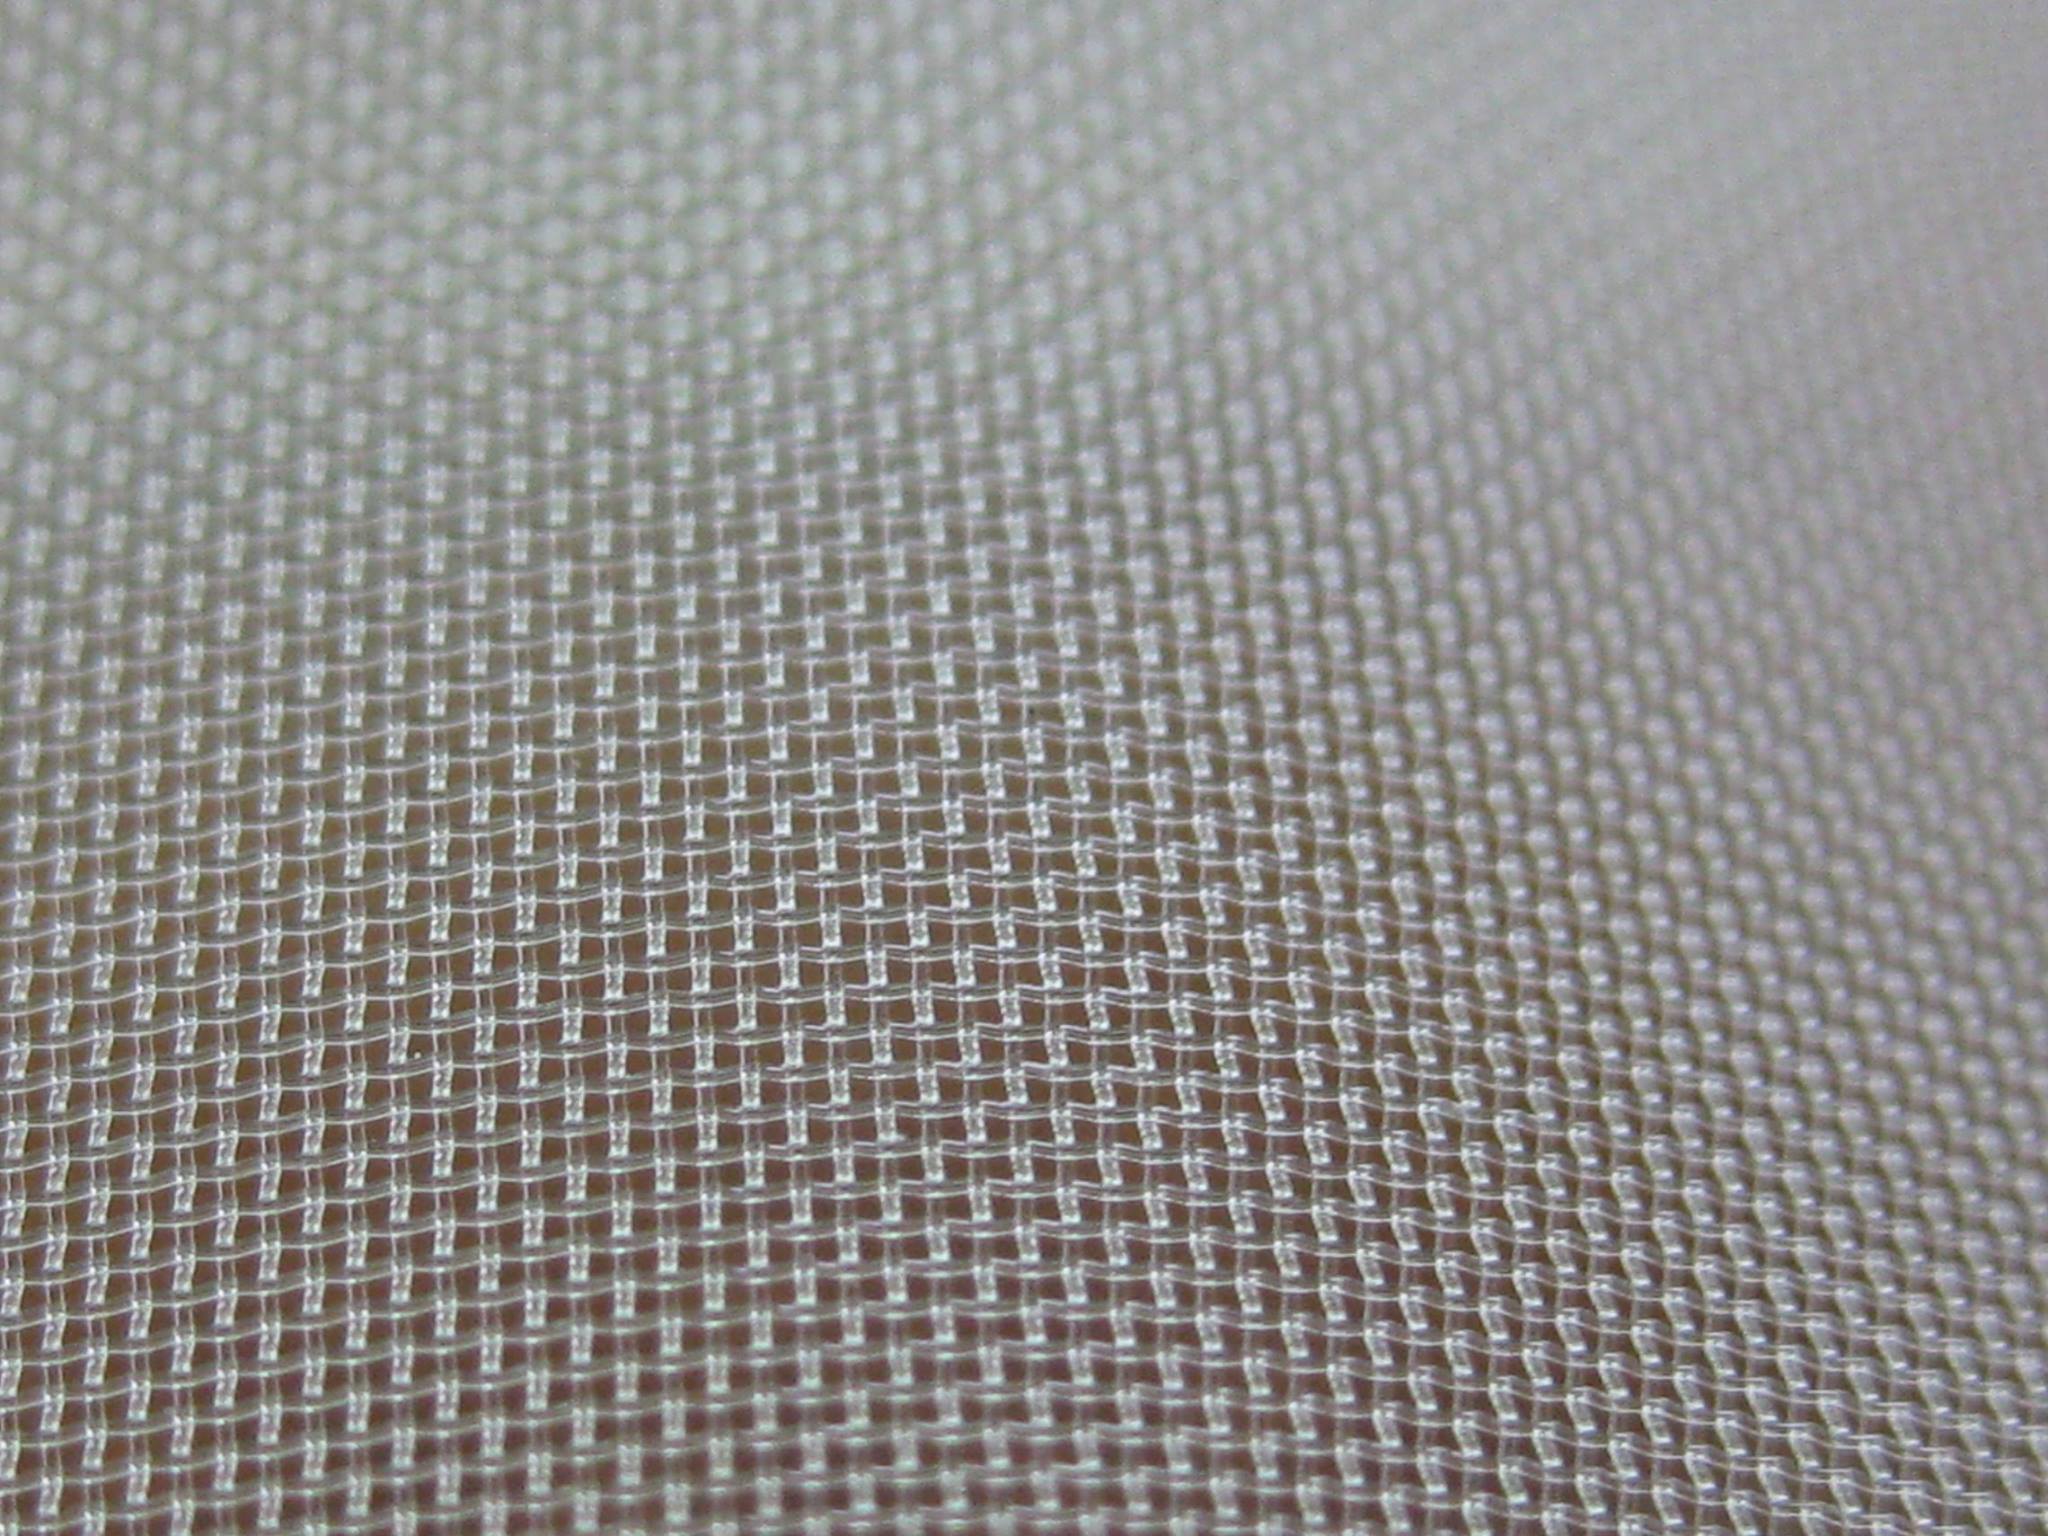 Filtration Fabric made of polyamide yarn- 315mikr. Width 122 cm.